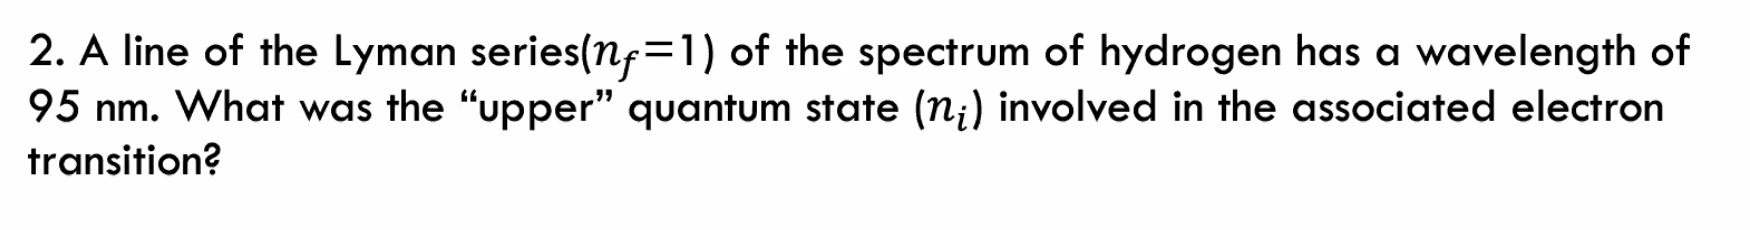 2. A line of the Lyman series(nf=1) of the spectrum of hydrogen has a wavelength of
95 nm. What was the "upper" quantum state (n;) involved in the associated electron
transition?
